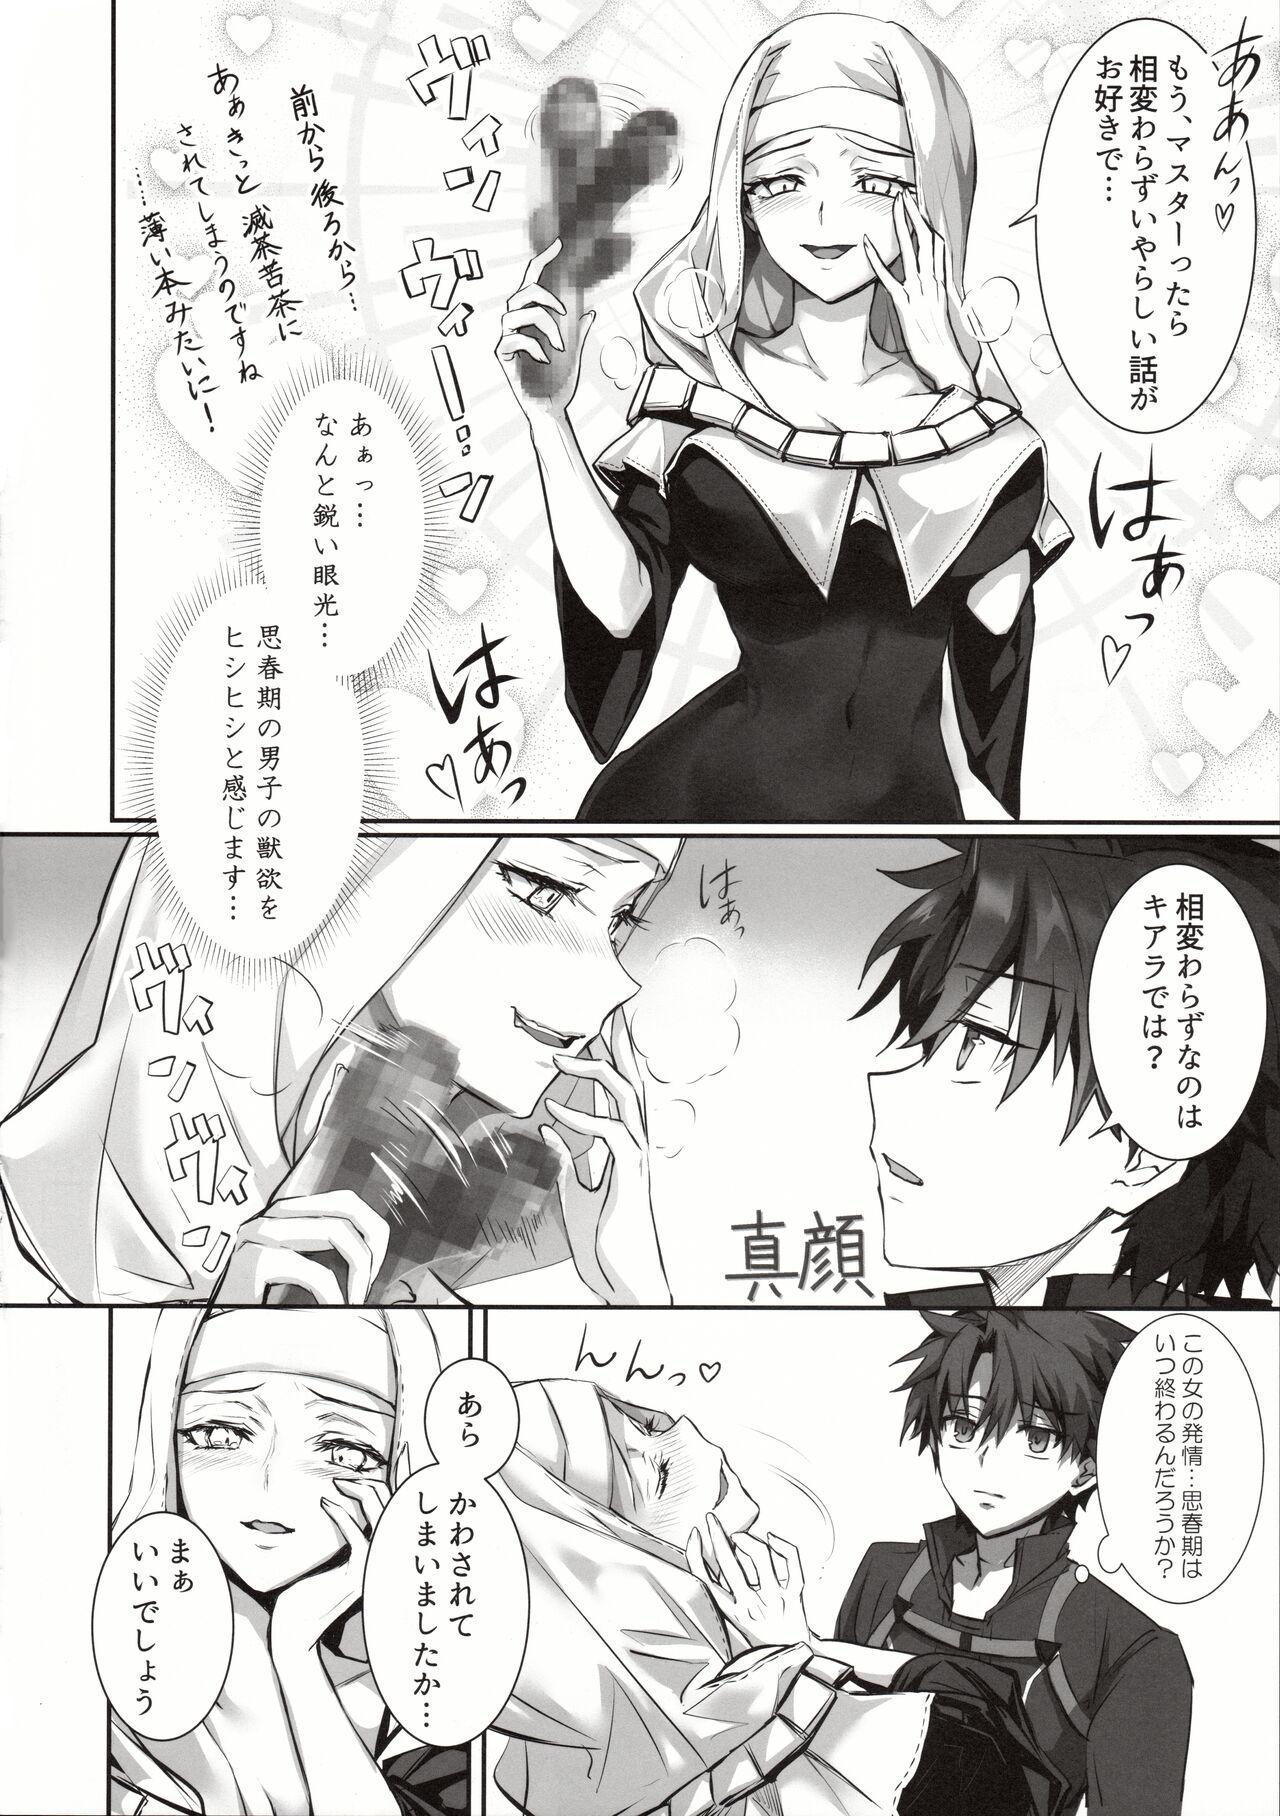 Gay Shorthair the innermoSt of the Girl - Fate grand order Bear - Page 3